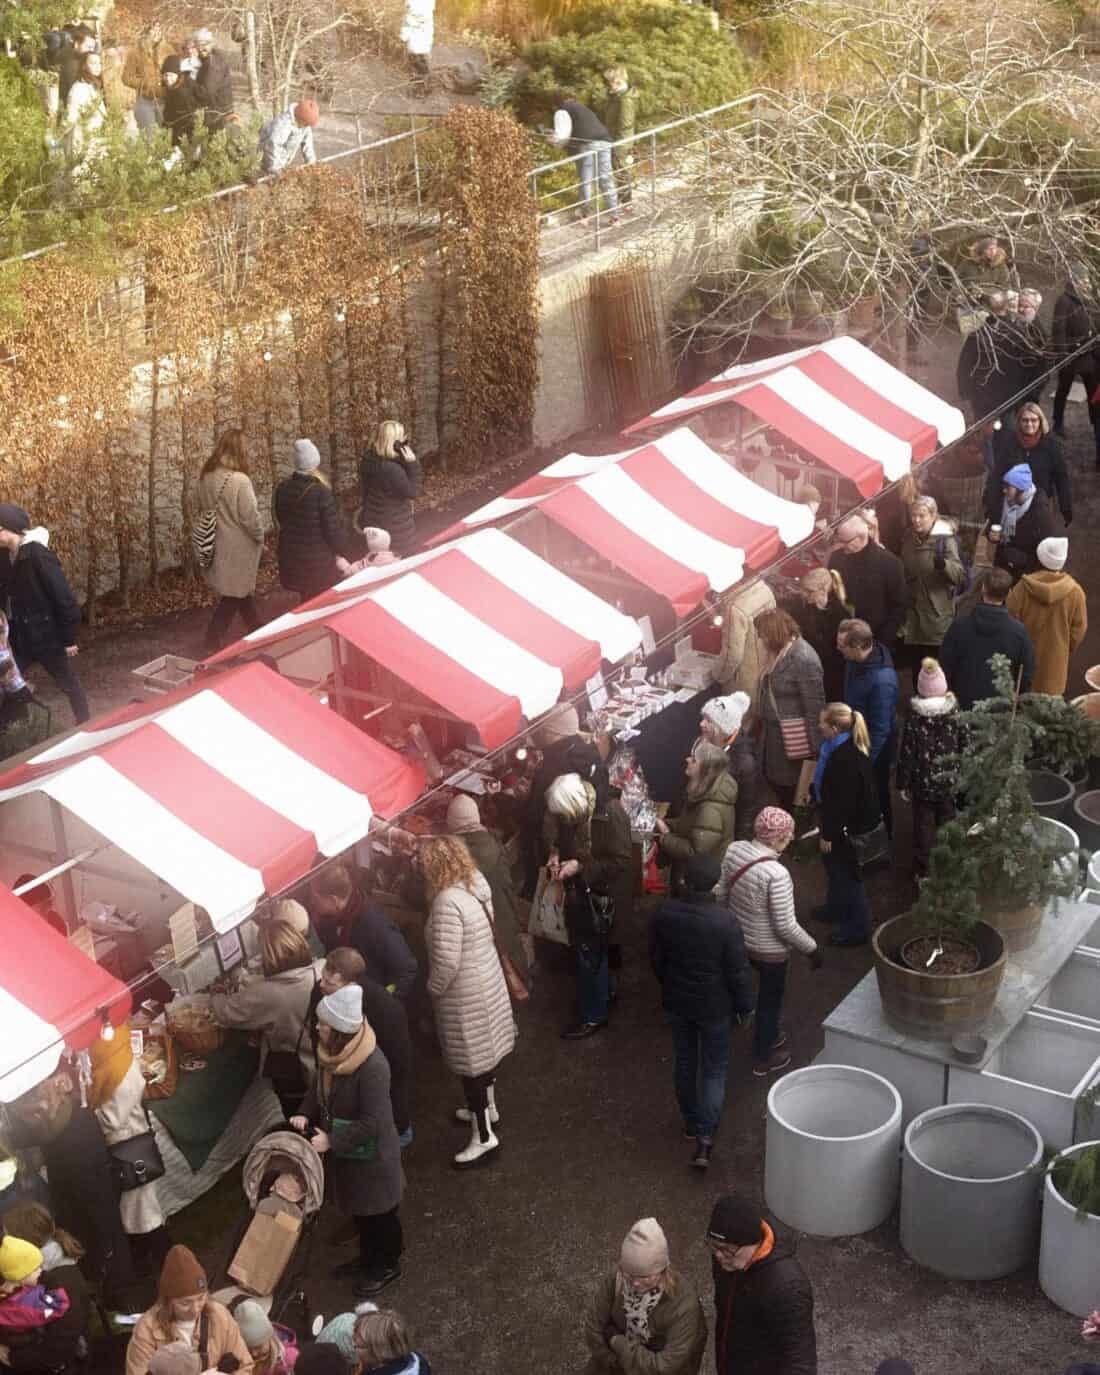 Outdoor market with red-and-white striped awnings, bustling with shoppers.